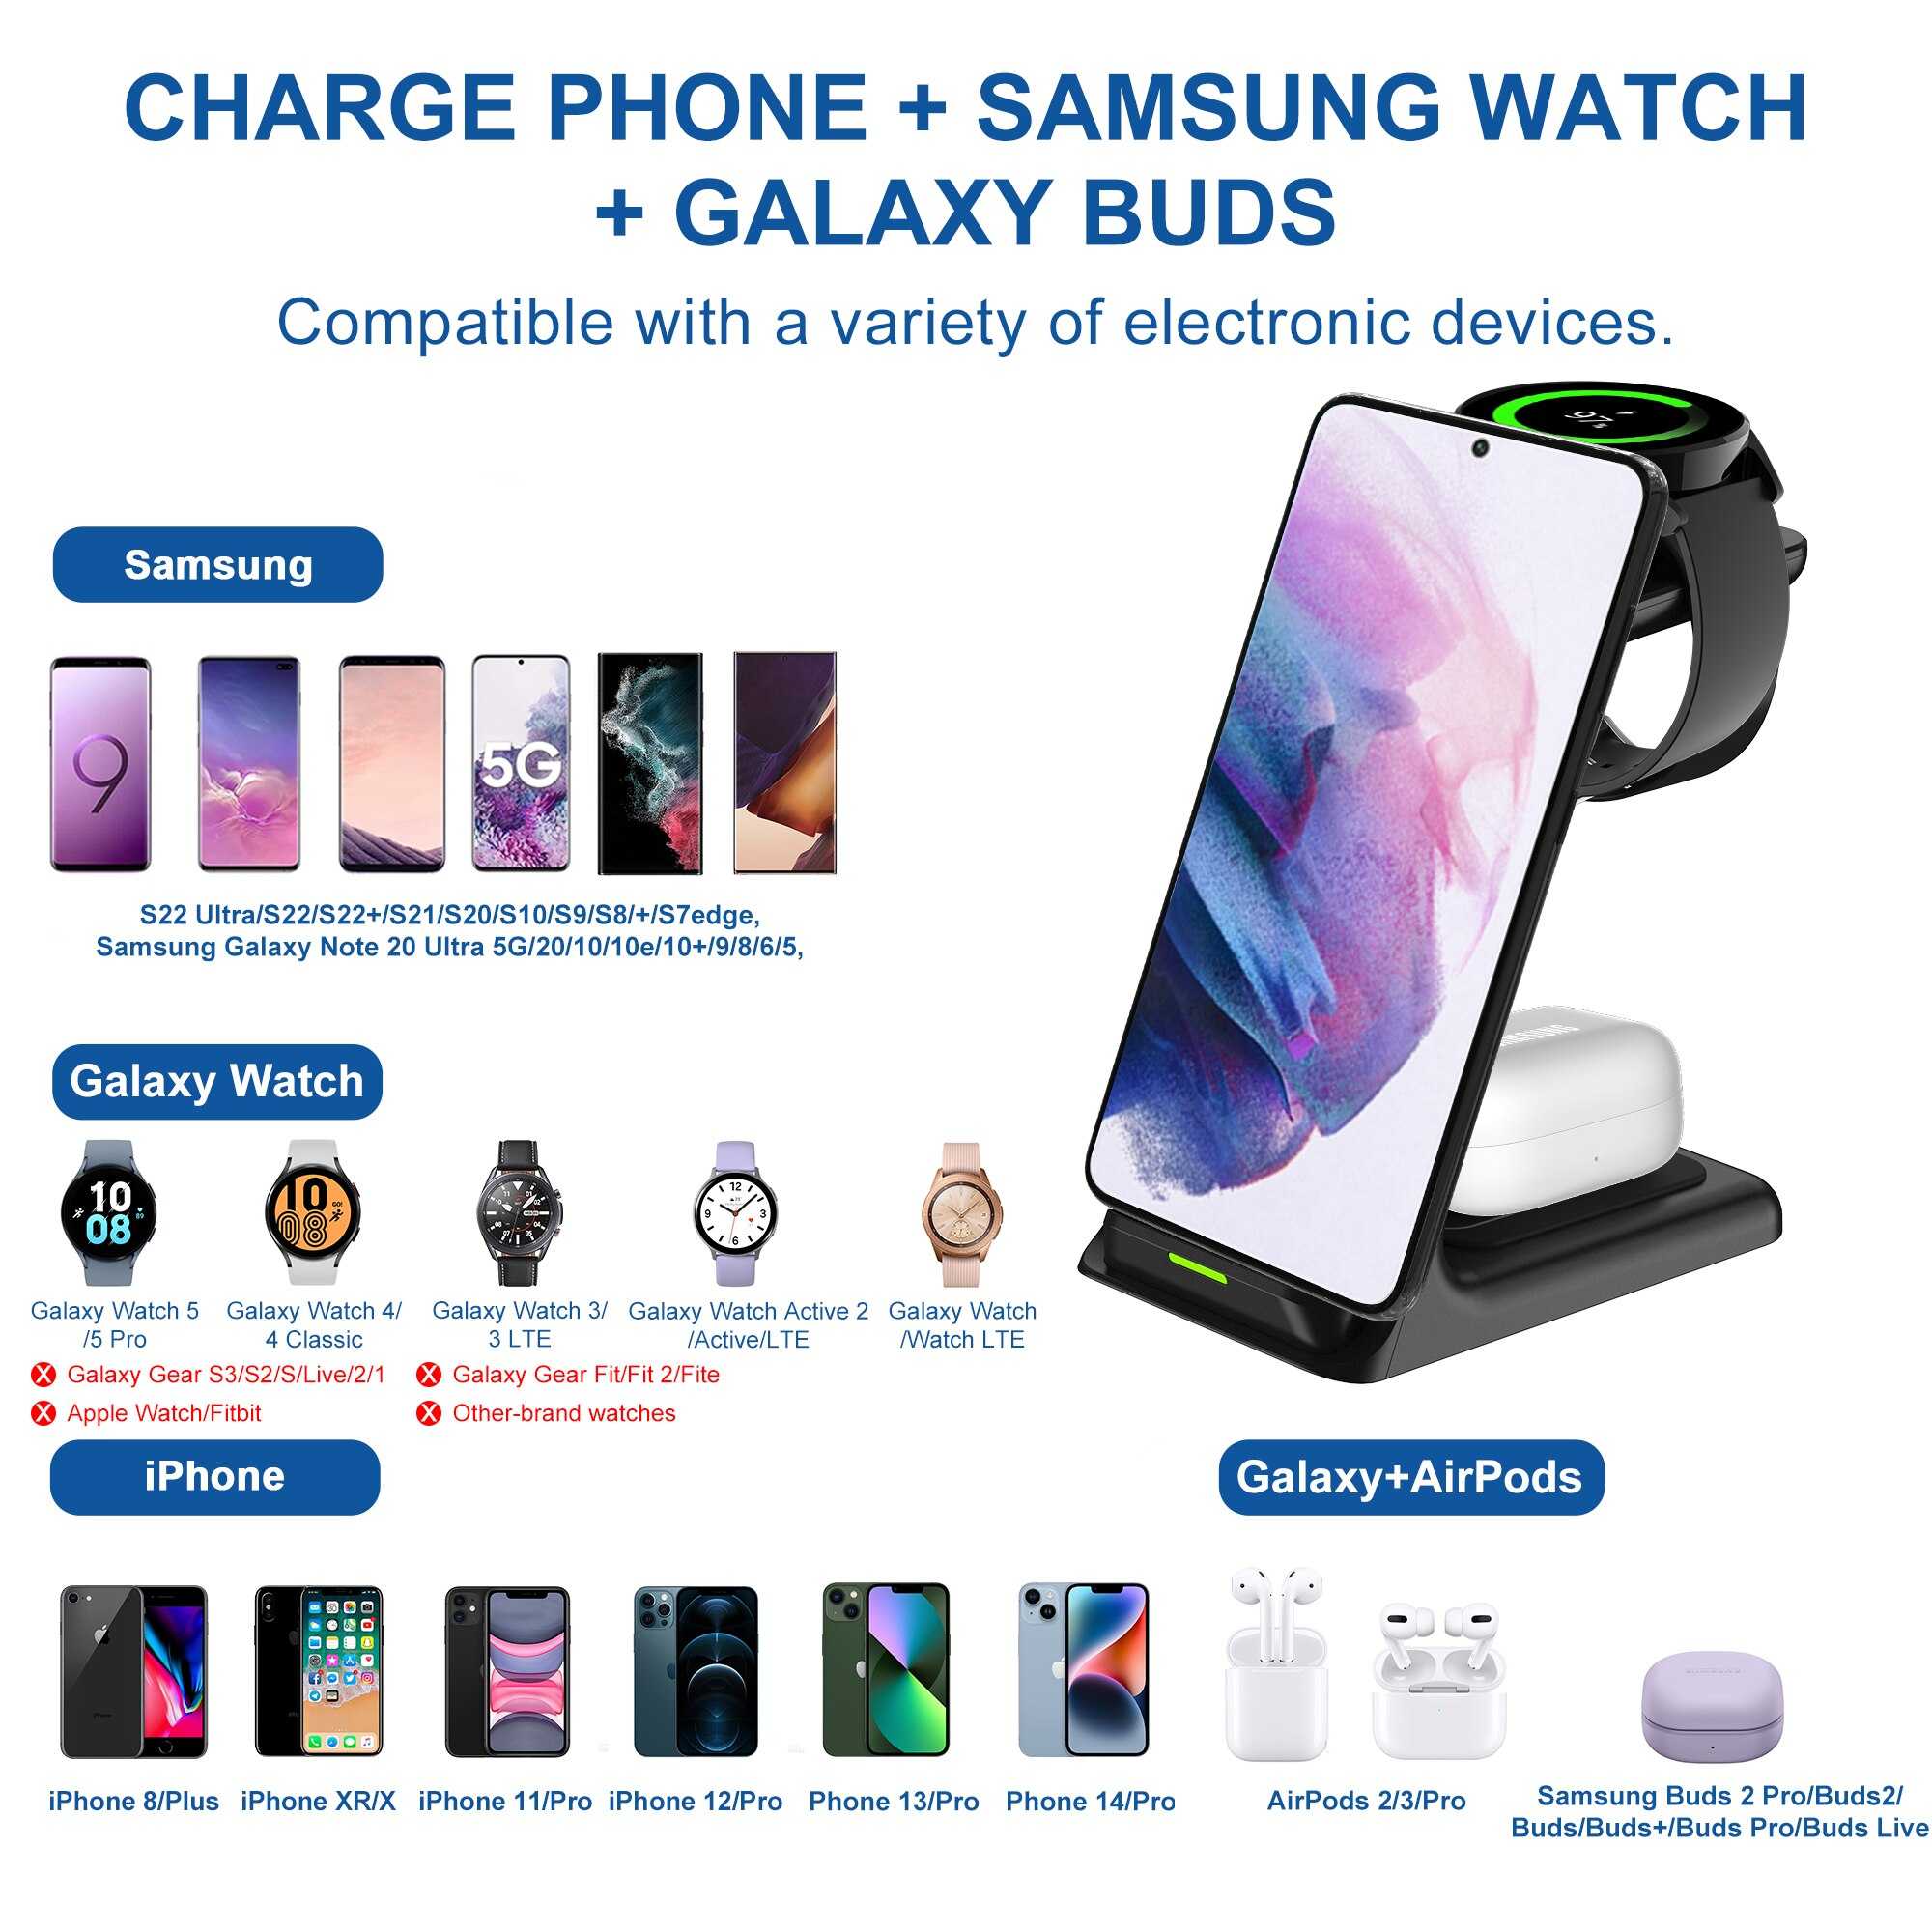 20W Wireless Chargers Stand Fast Charging Station for iPhone 14 13 iWatch 8 7 Samsung Z Fold3 Z Flip3 S21 S20 Galaxy Watch 5 4 3